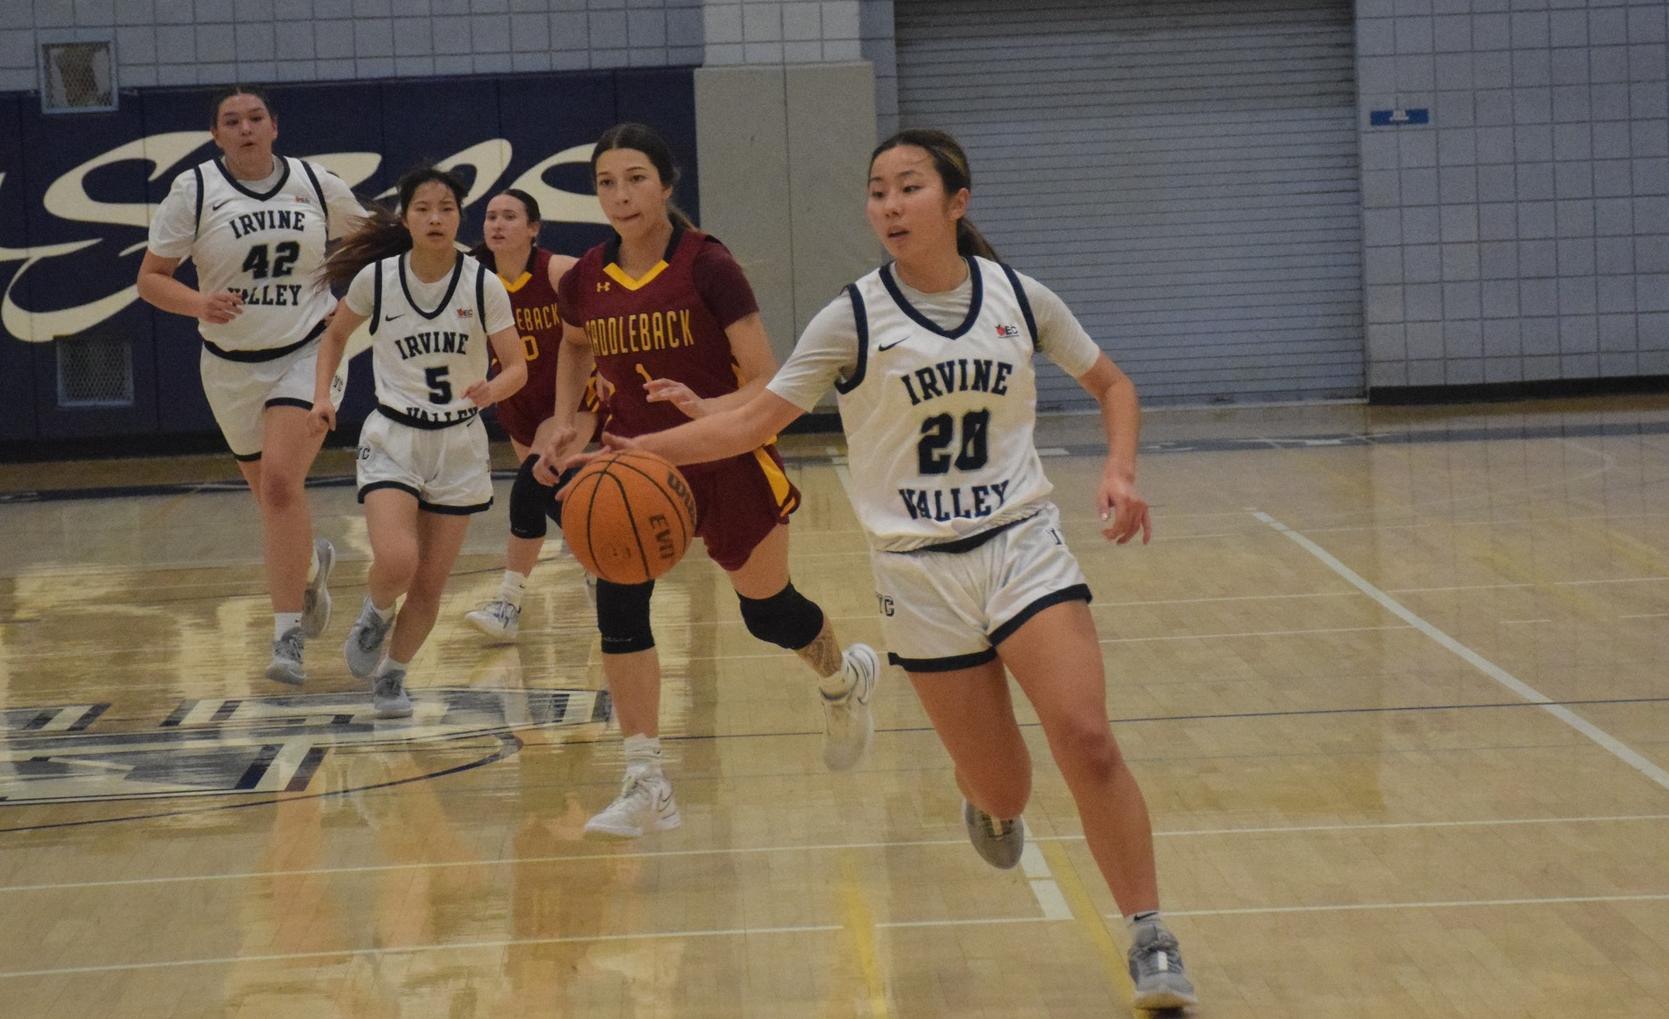 Women's basketball has tough, up-coming game against RCC